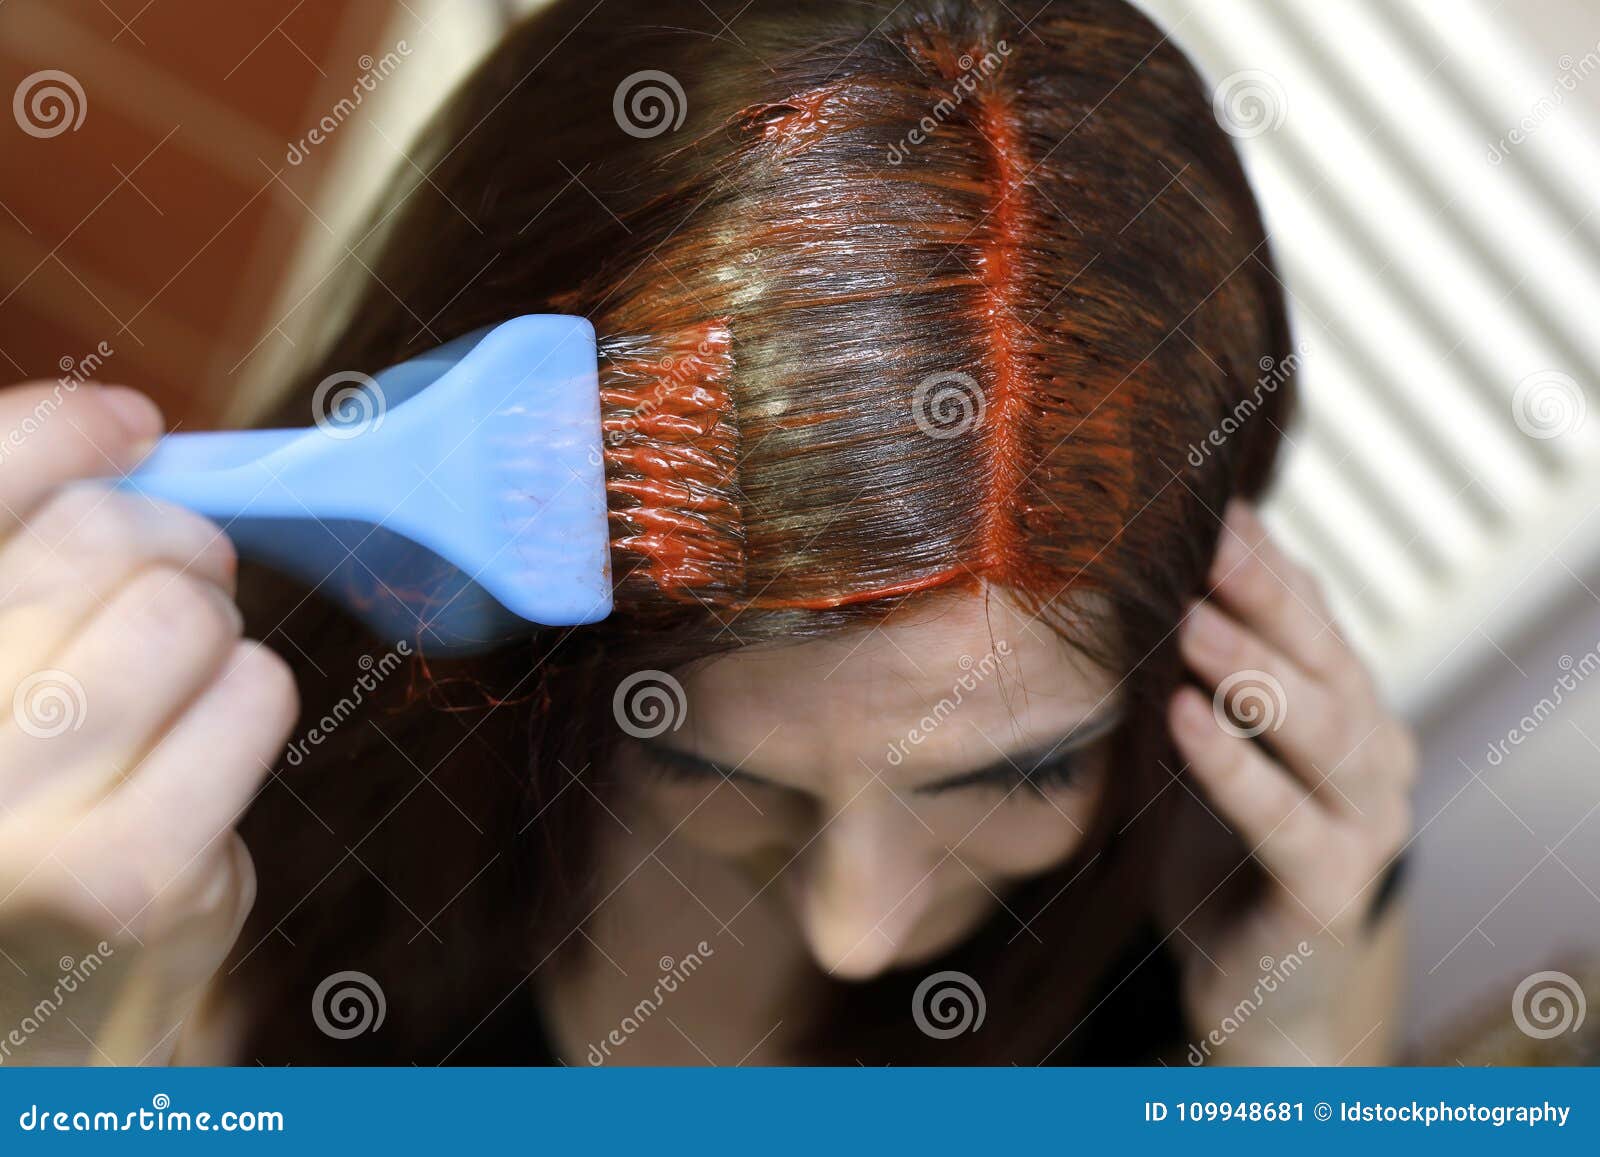 Process of Hair Coloring at Home. Stock Image - Image of home, cosmetic:  109948681